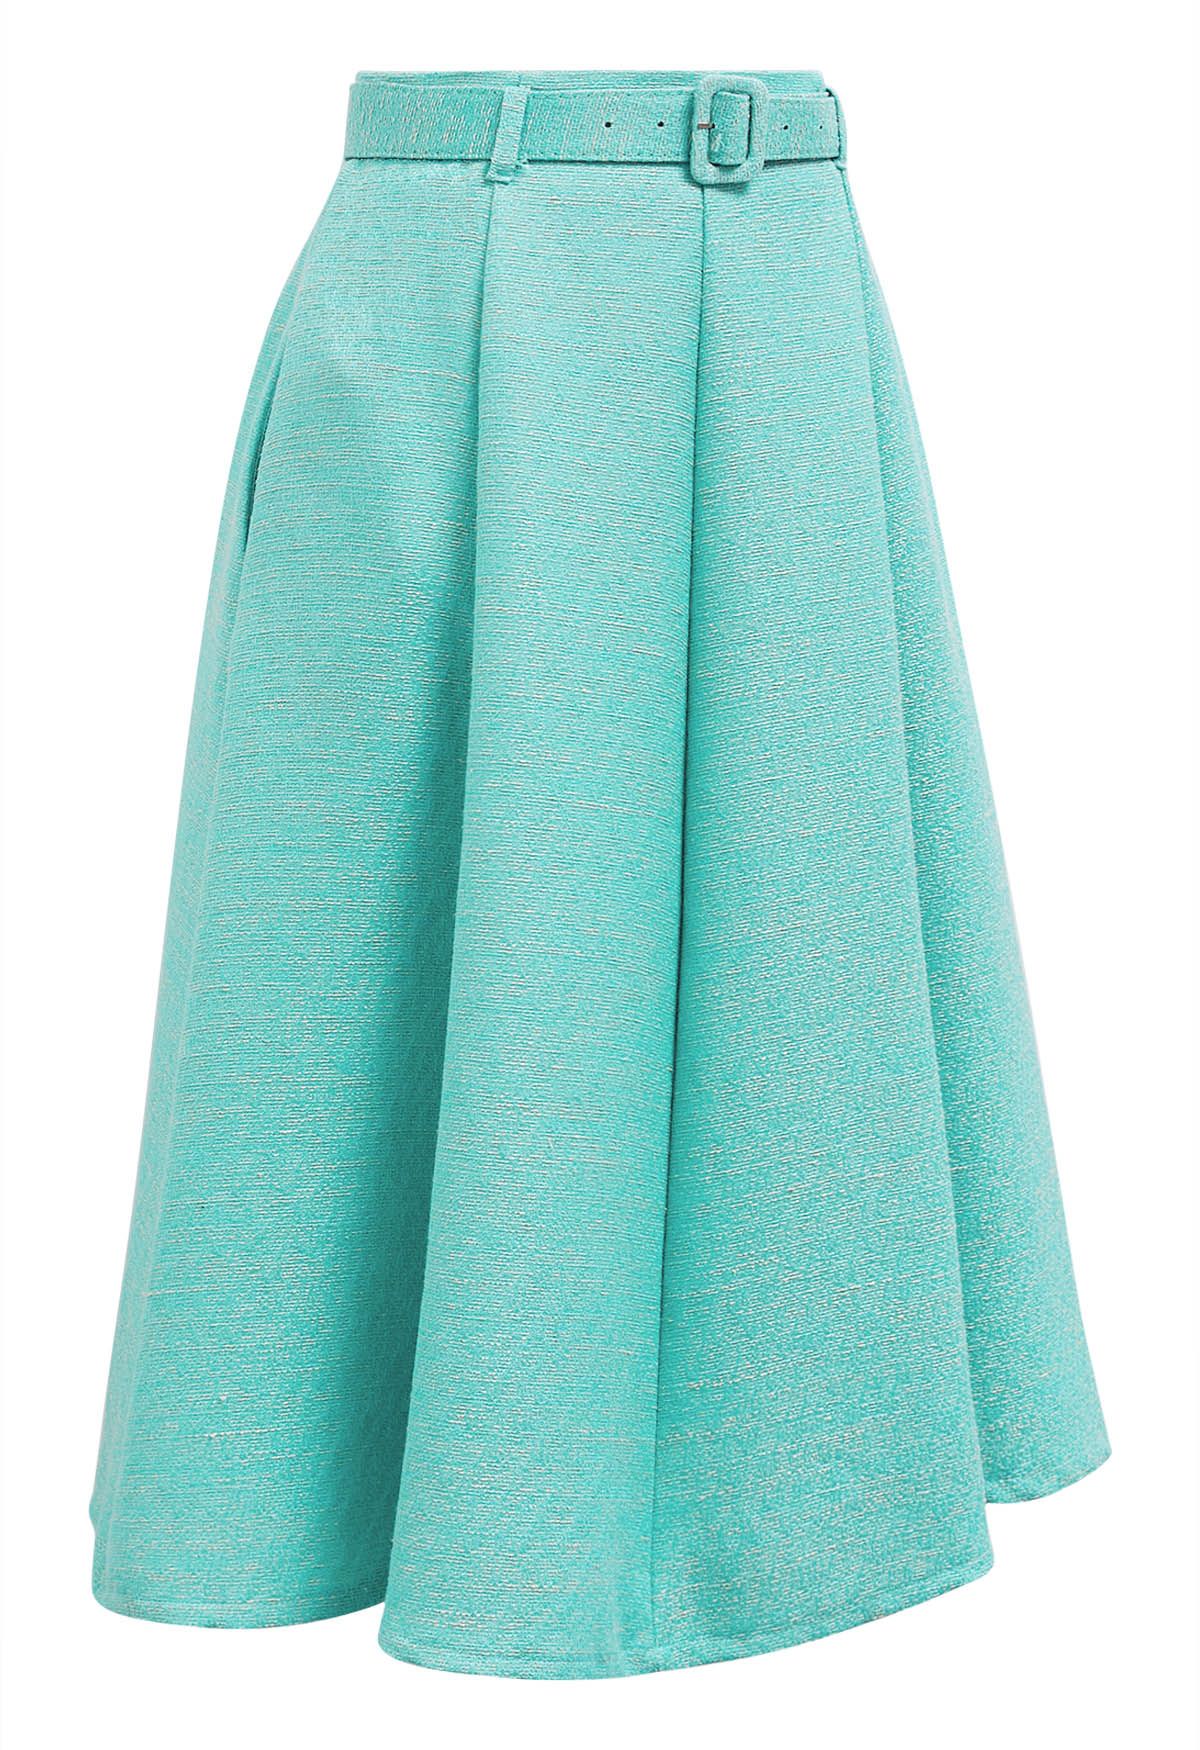 Shimmer Tweed Belted A-Line Midi Skirt in Turquoise